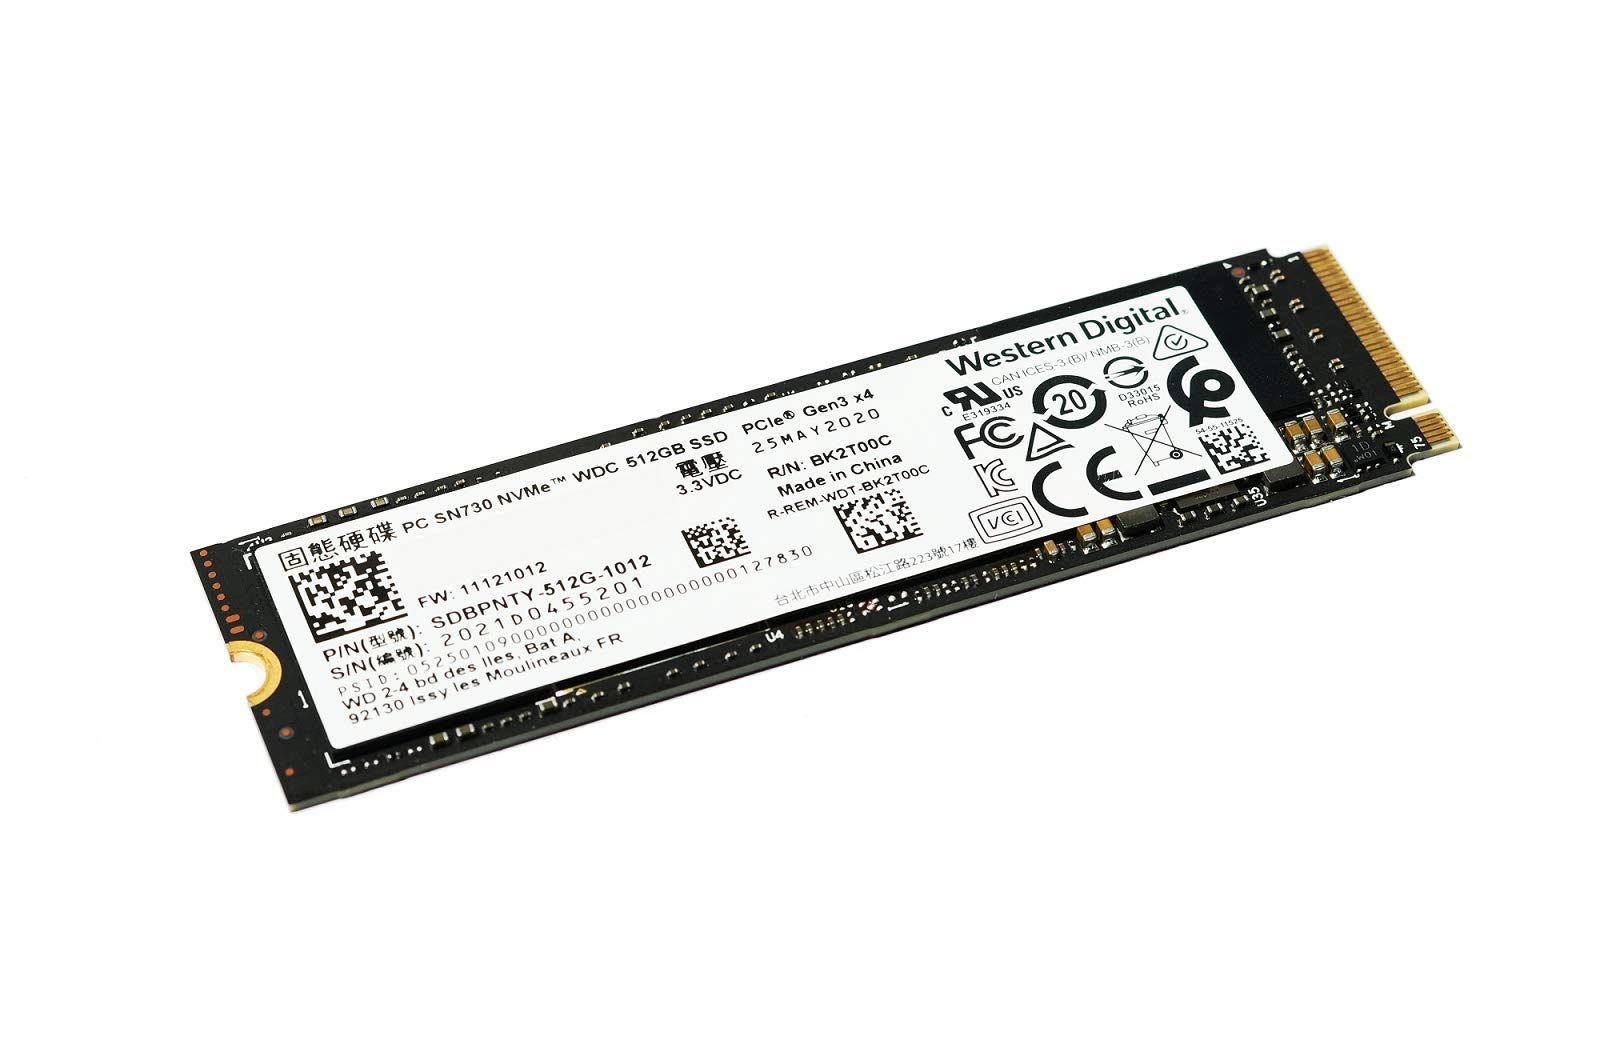 OEM OEM Western Digital PC SN730 NVMe SSD 512GB Capacity Read speeds up to 3,400MB/s, Write Speed up to 2,1002MB/s Available in M.2 2280 Form Facto...